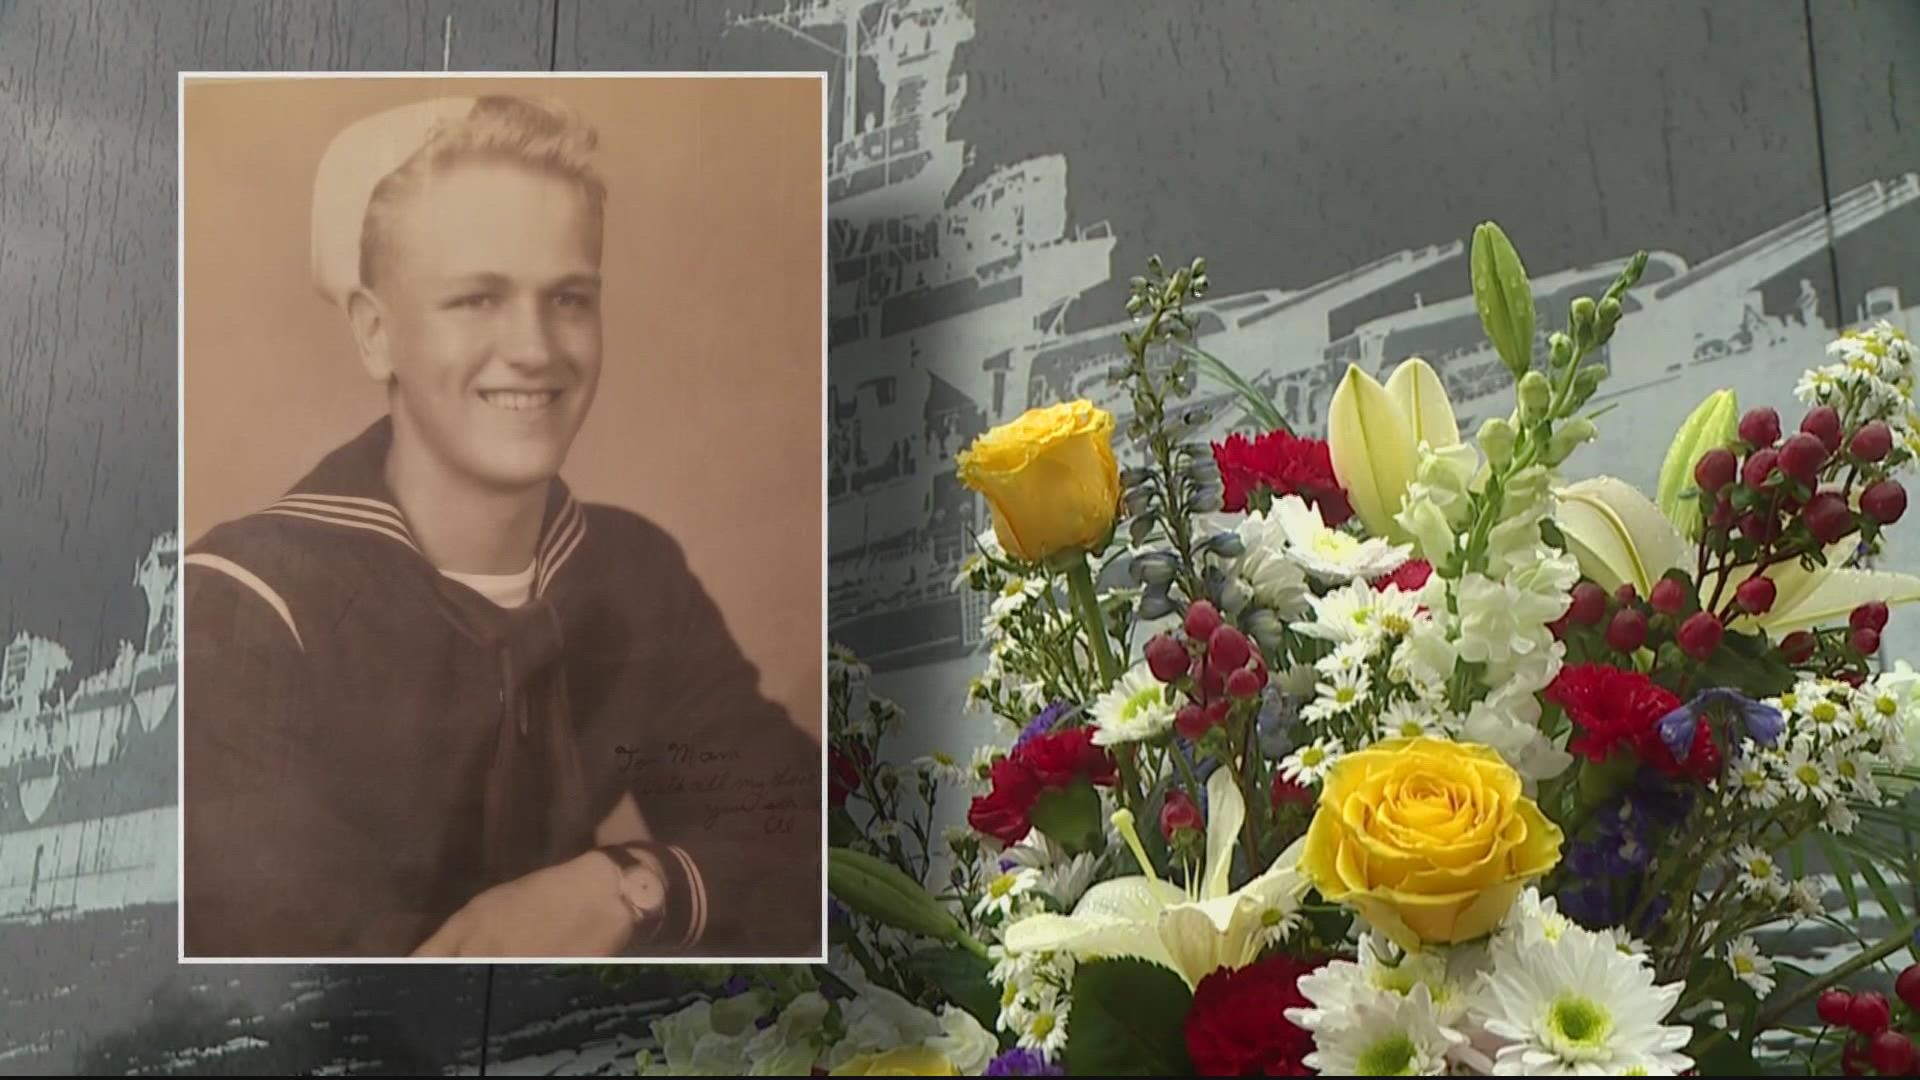 For nearly 77 years, Dave Lundgren was listed as missing and unaccounted for. Paperwork reveals his remains were found but that information was recently discovered.